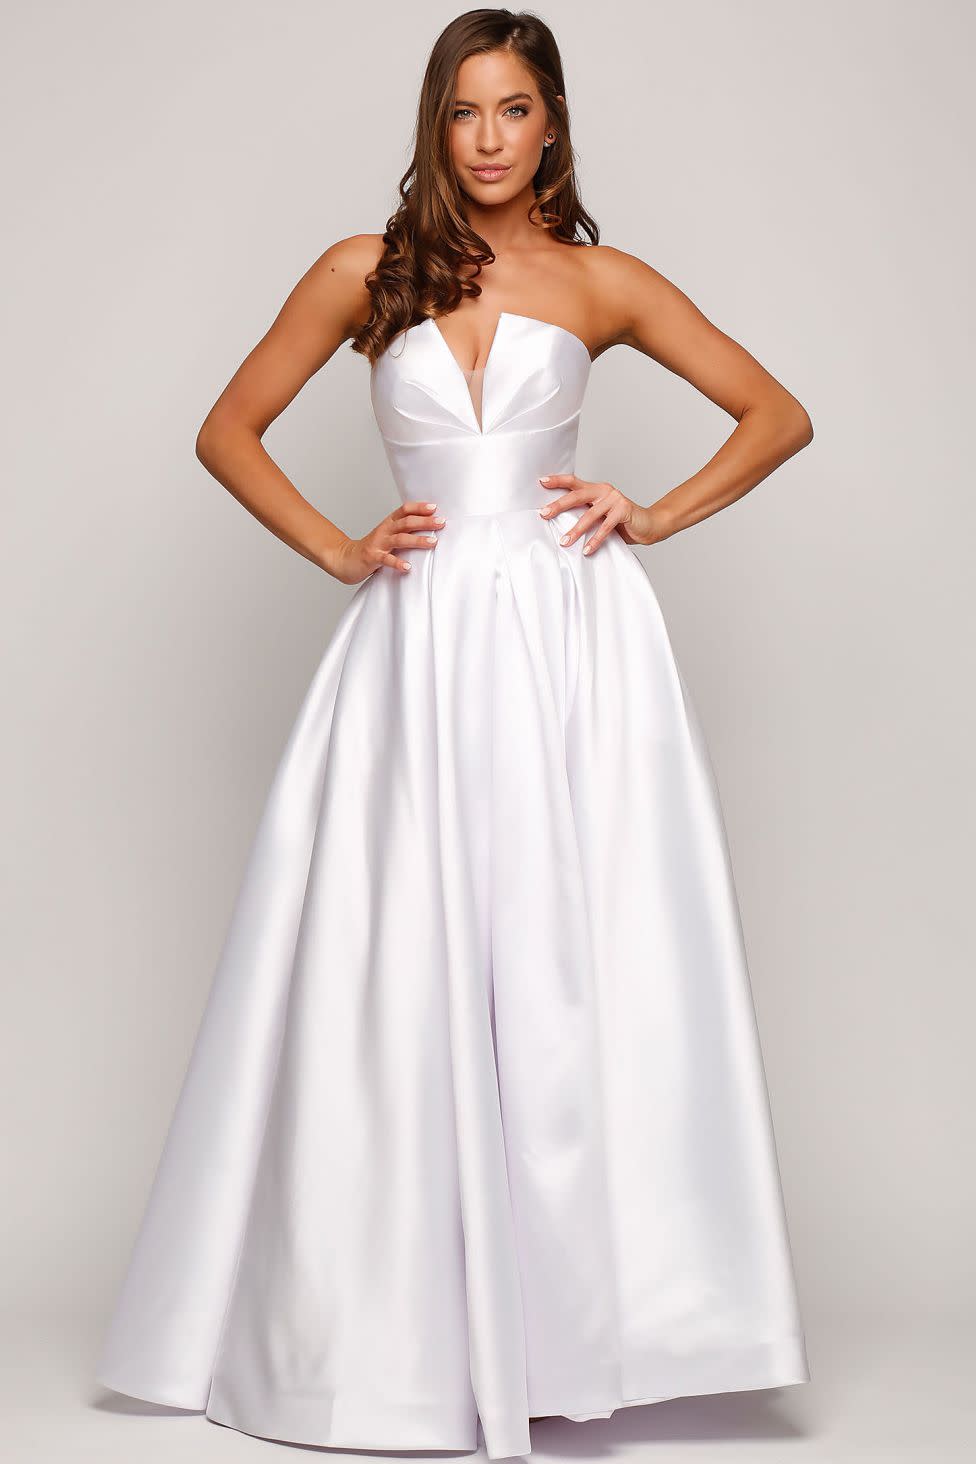 Tina Holly Capricorn Gown